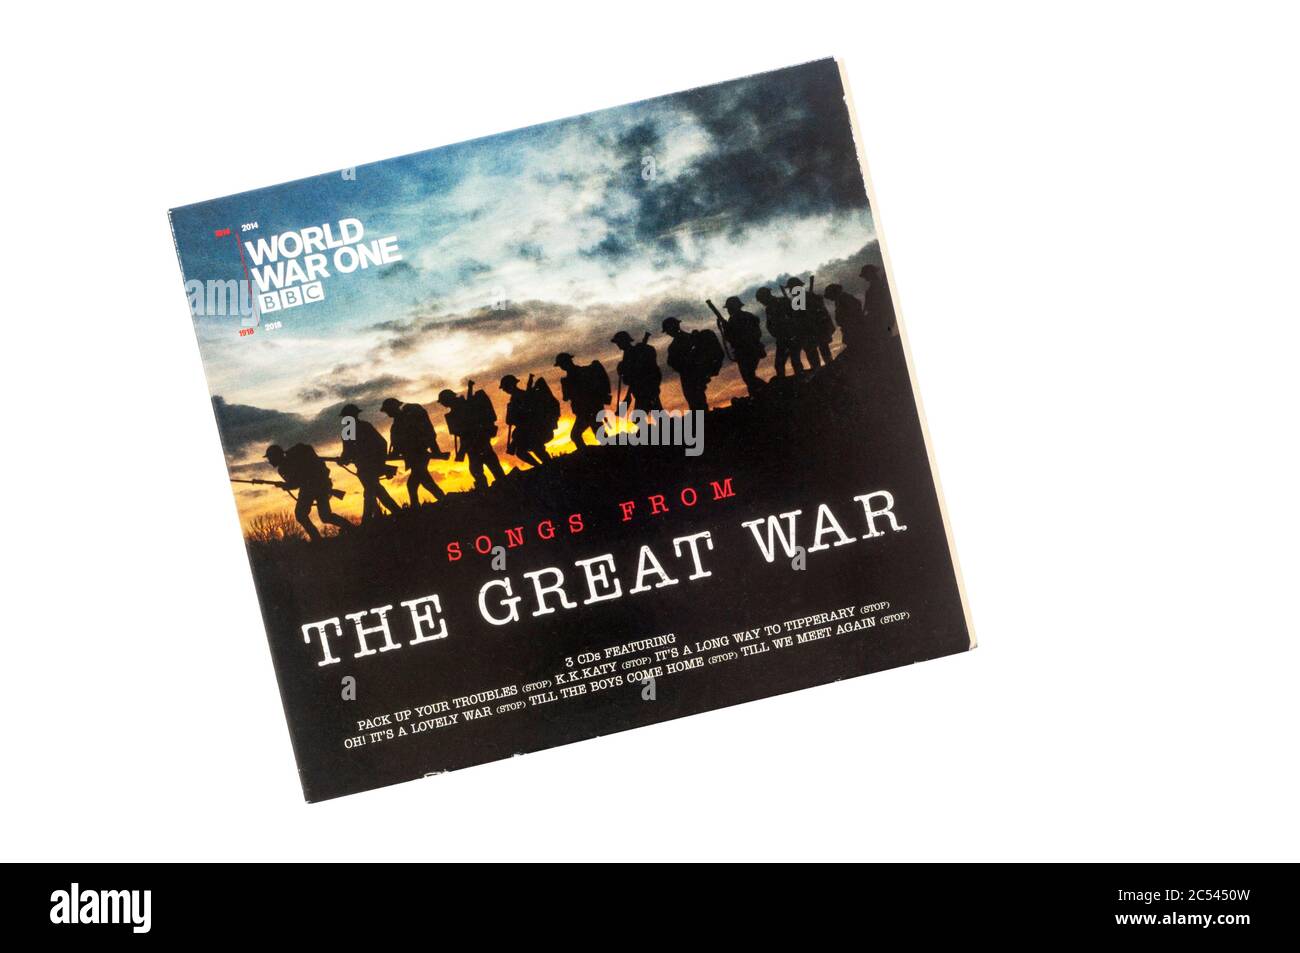 BBC box set of Songs From the Great War, released in 2014. Stock Photo